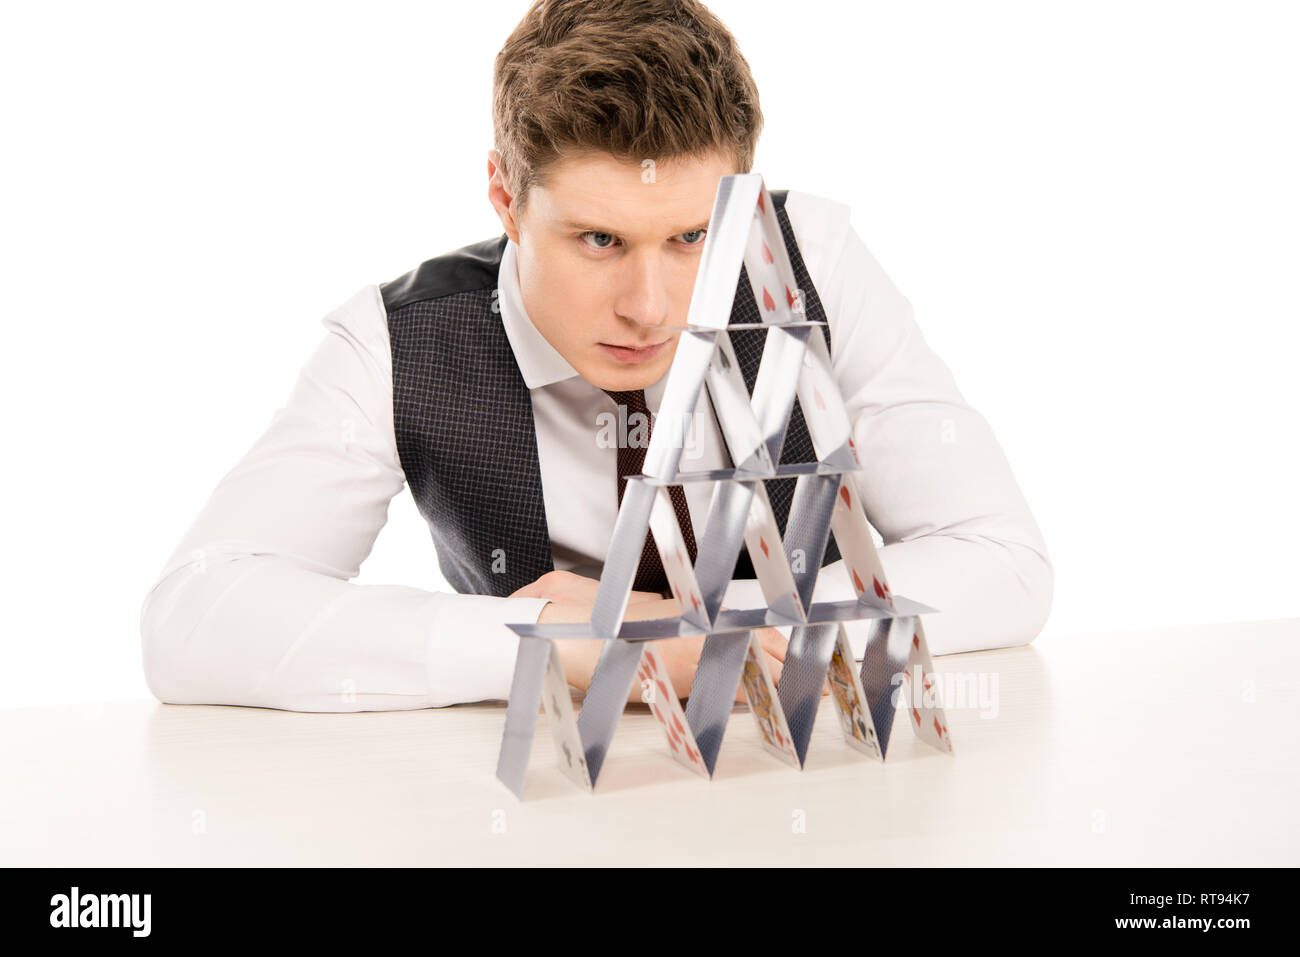 focused man making pyramid from playing cards isolated on white Stock Photo